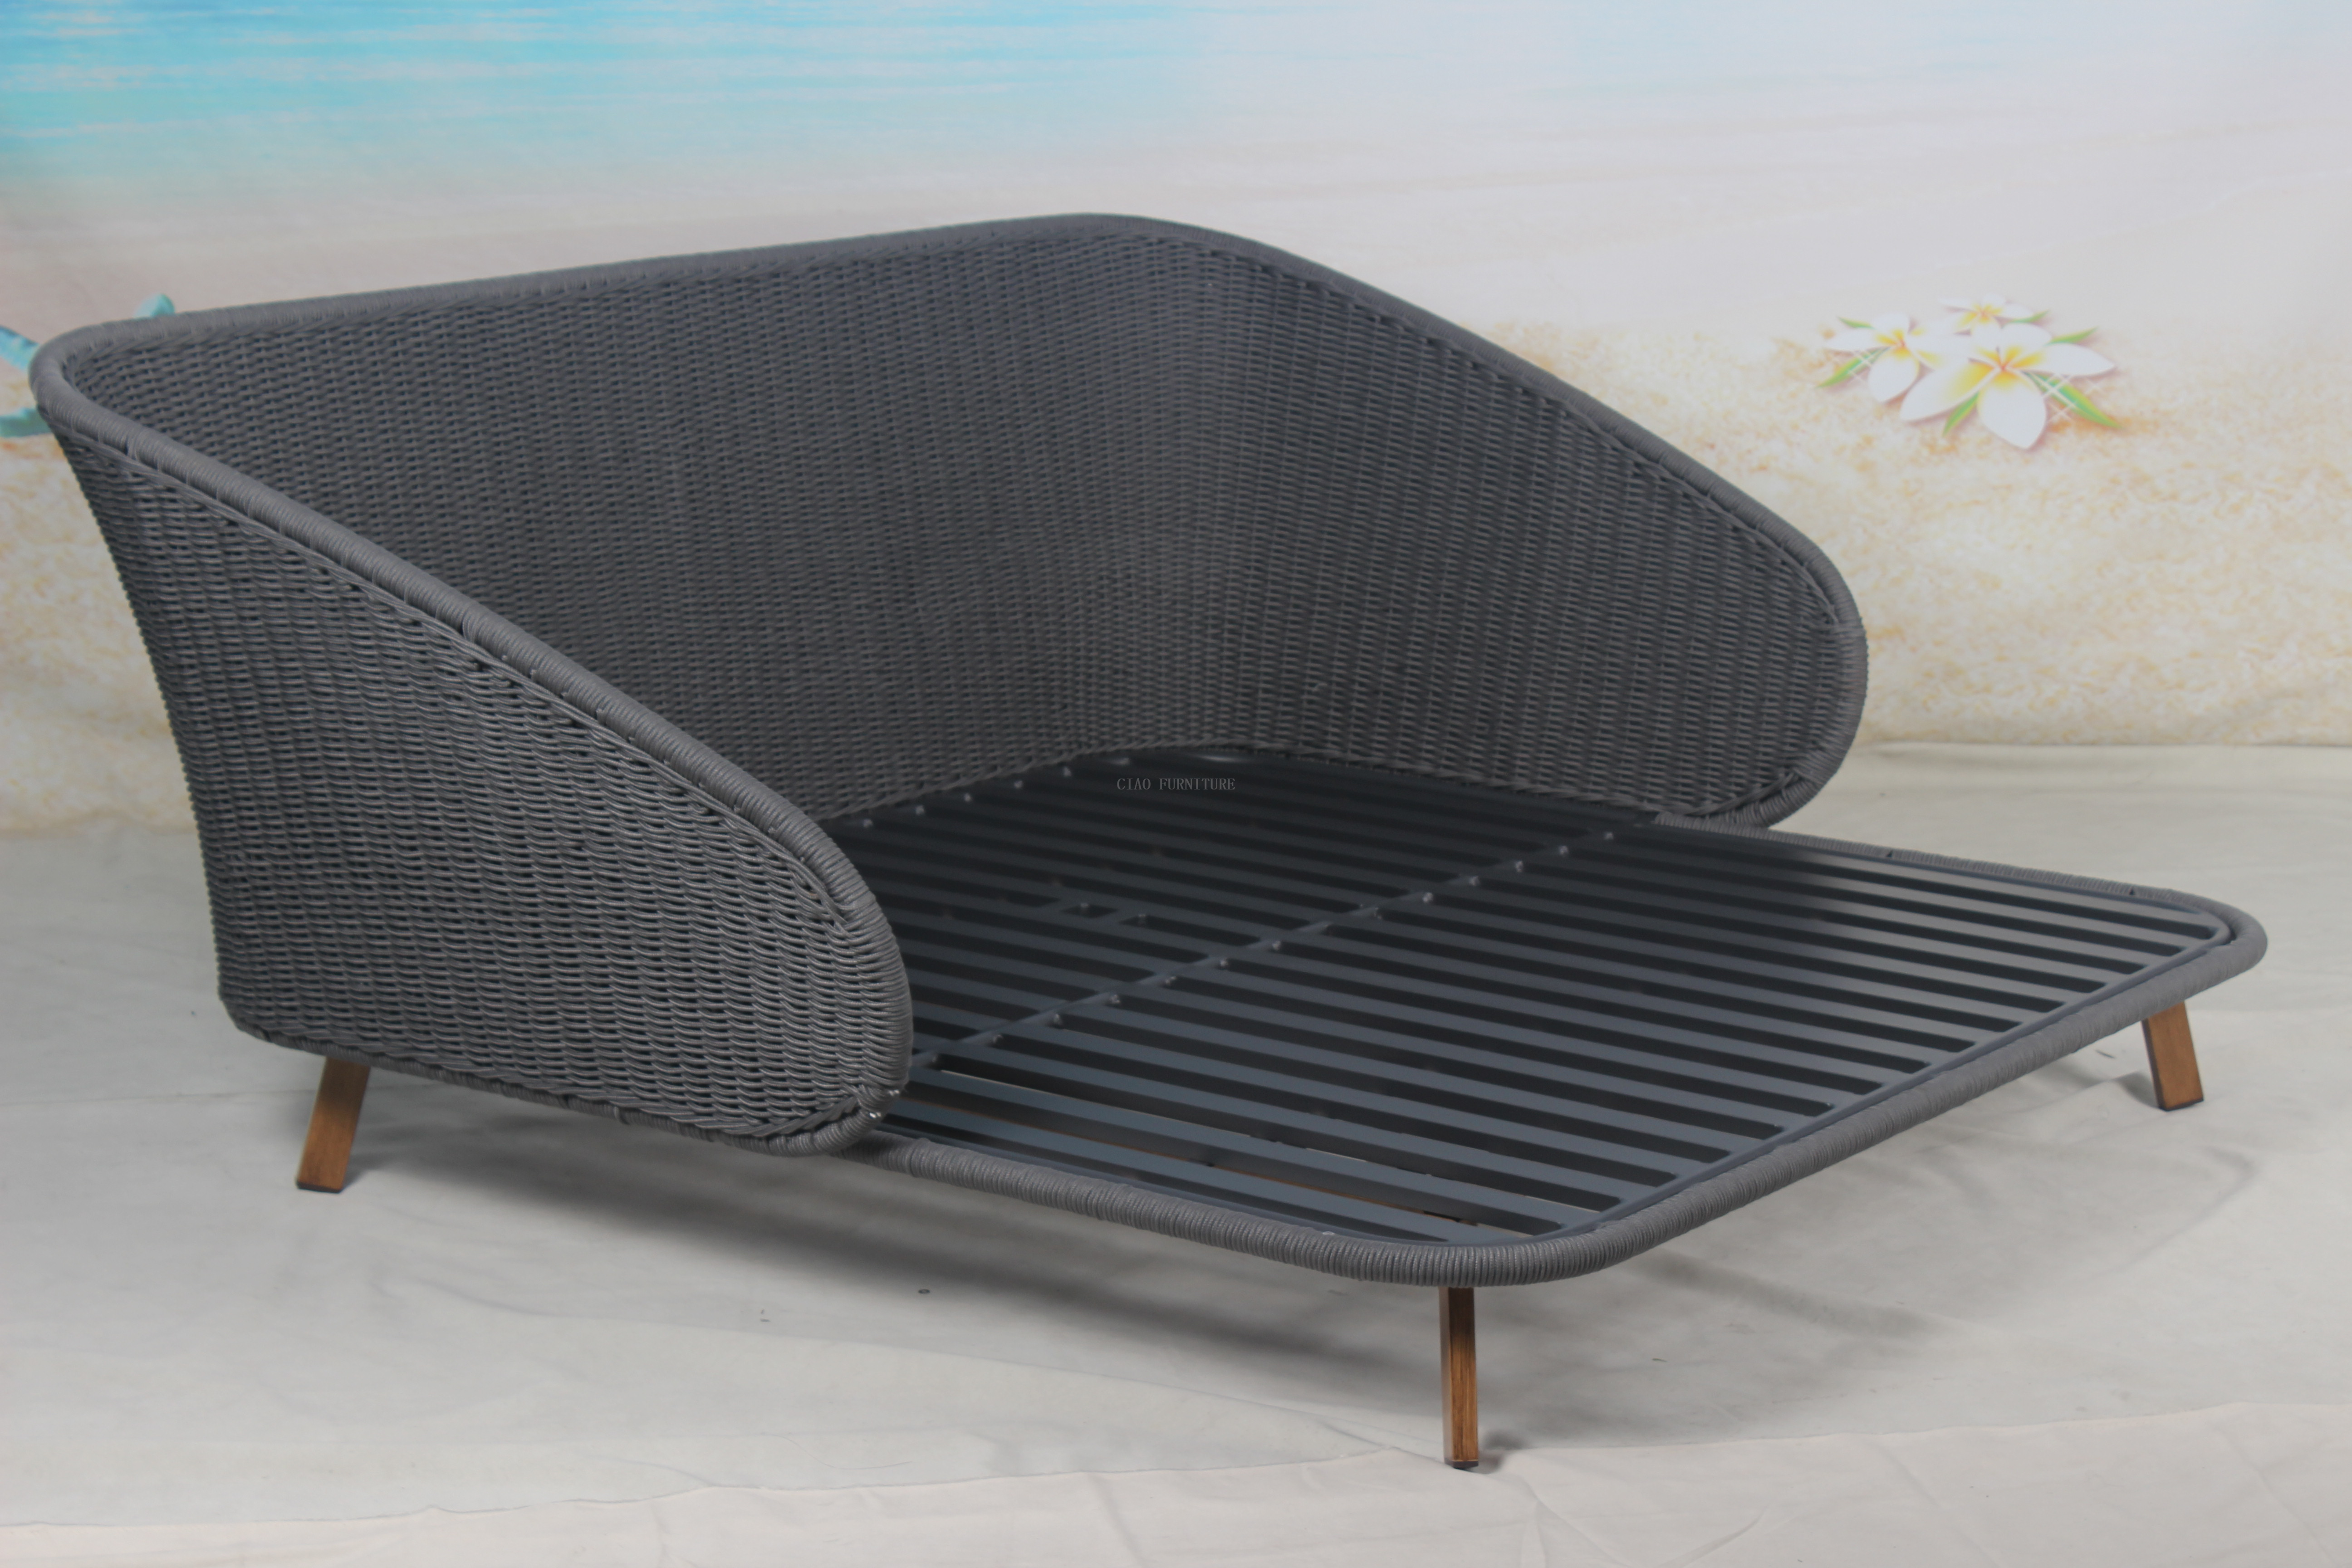 Modern outdoor patio aluminum daybed